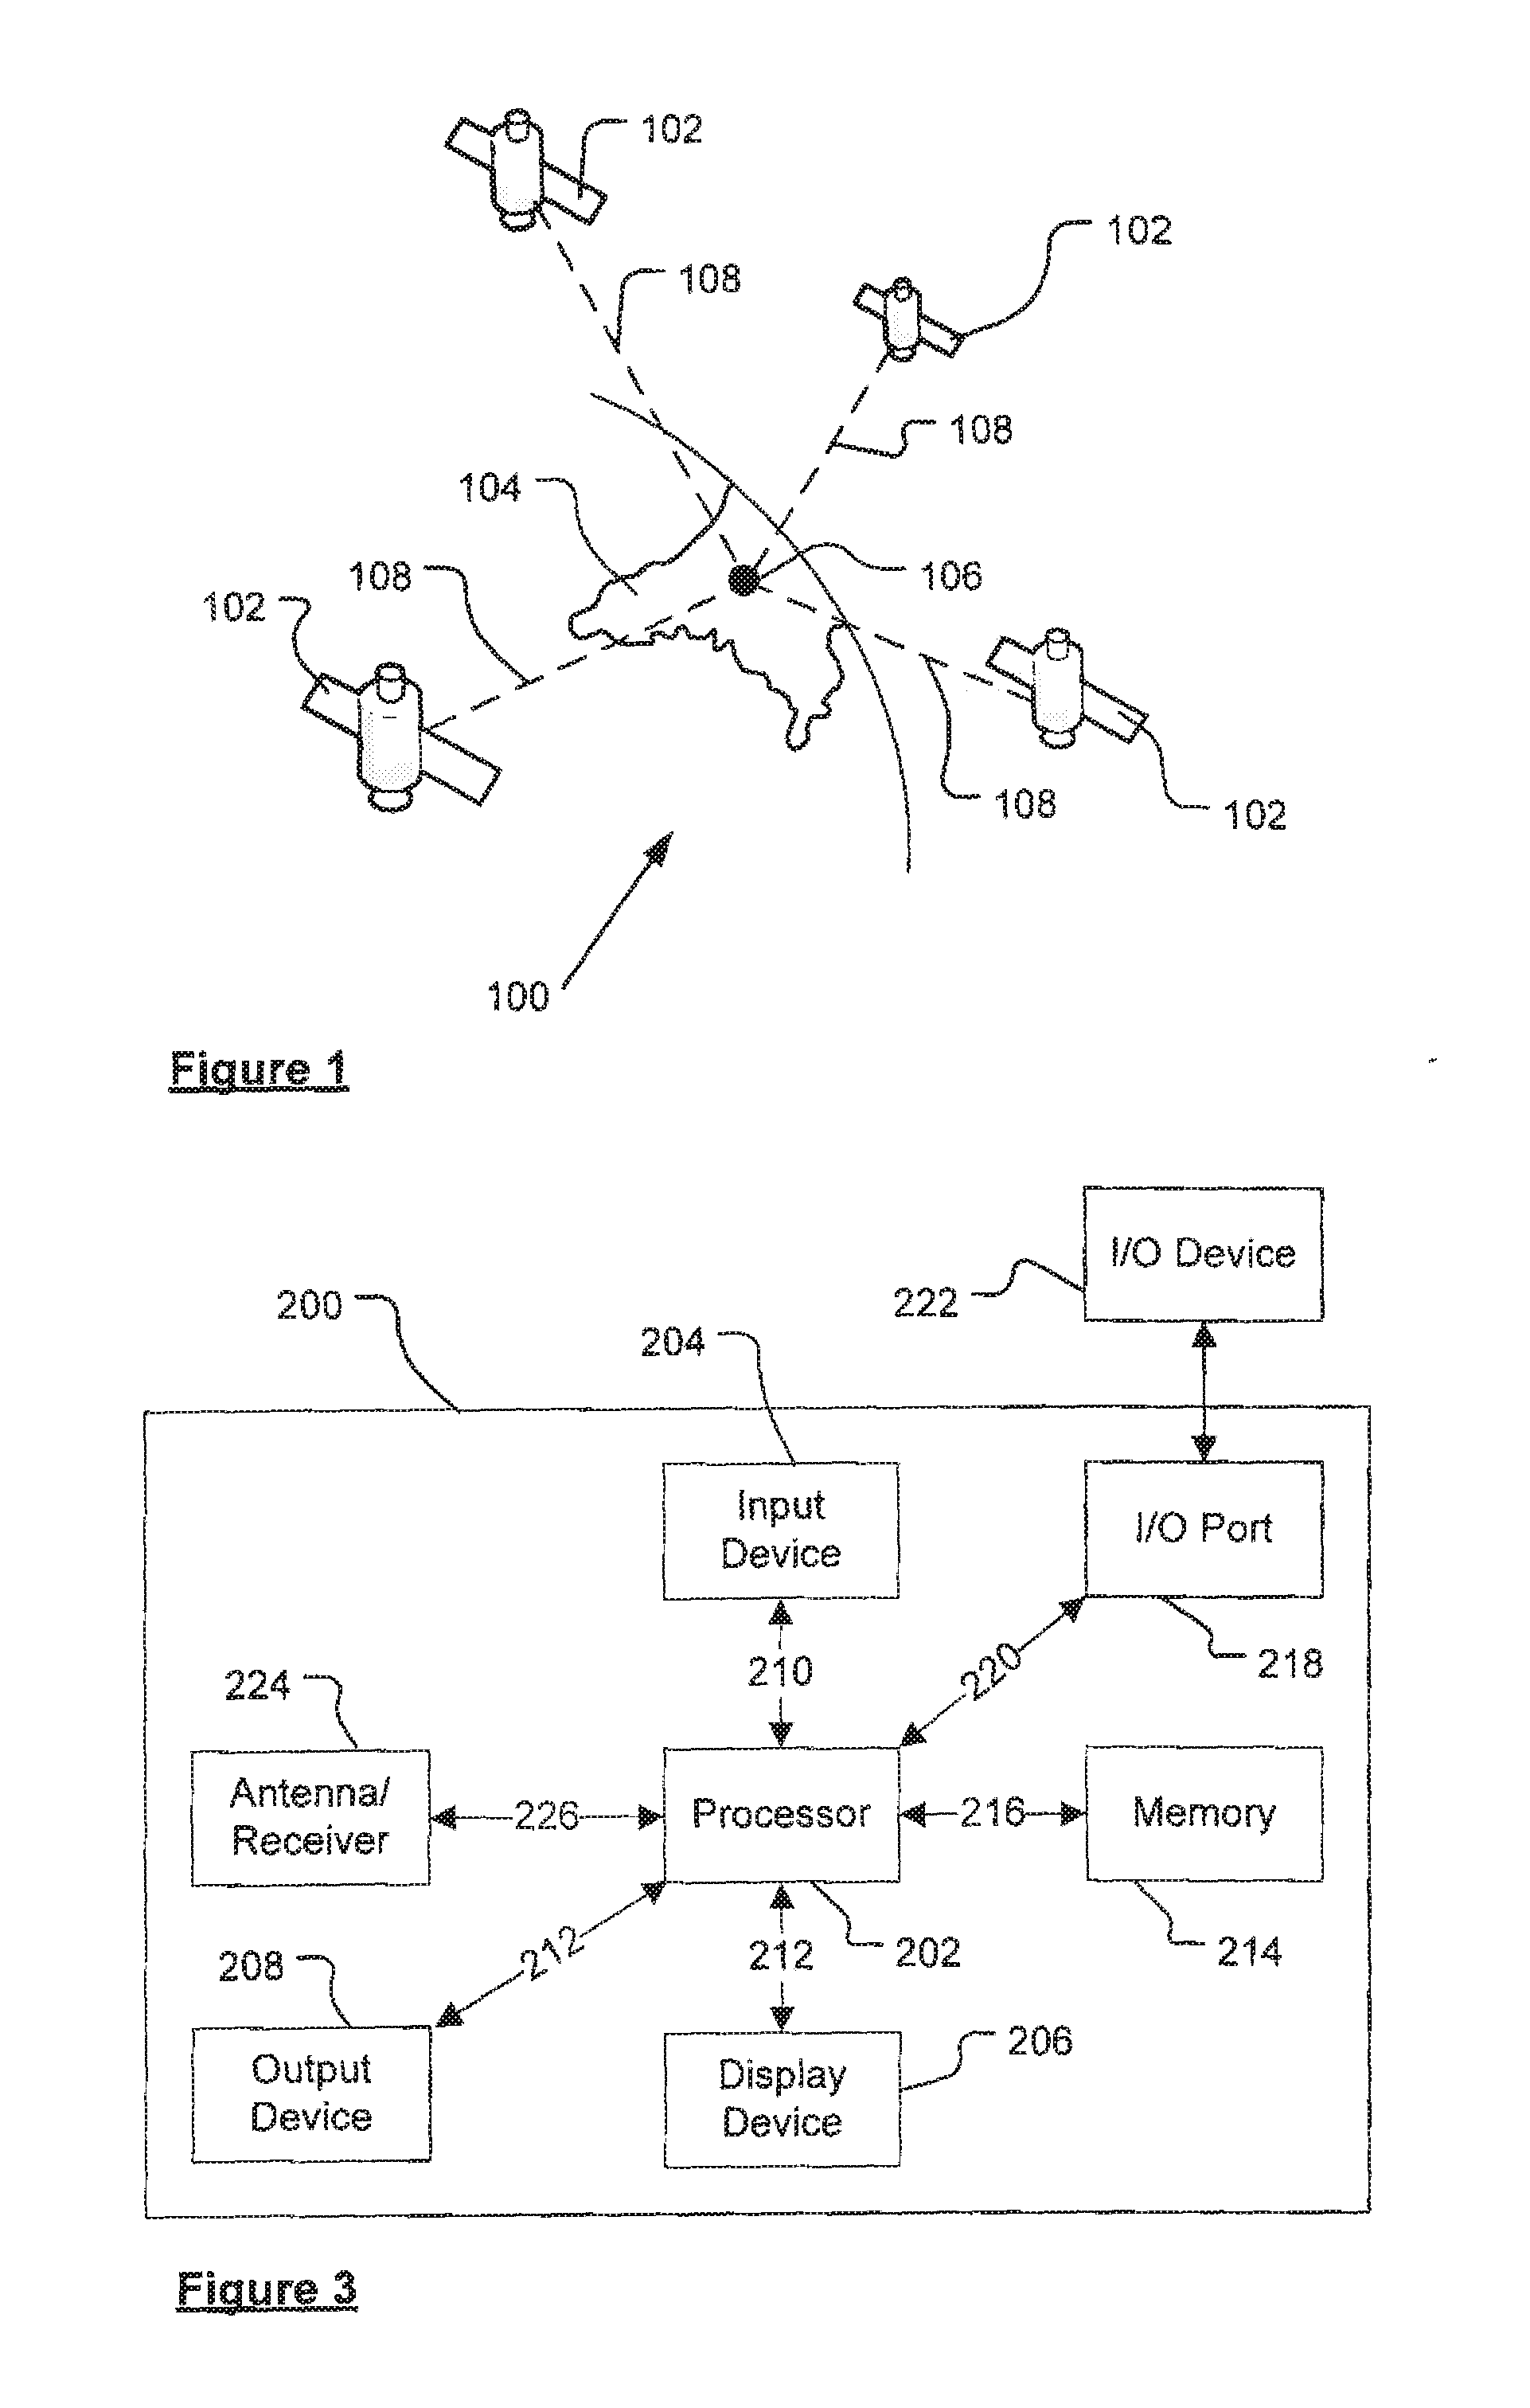 Mapping or navigation apparatus and method of operation thereof